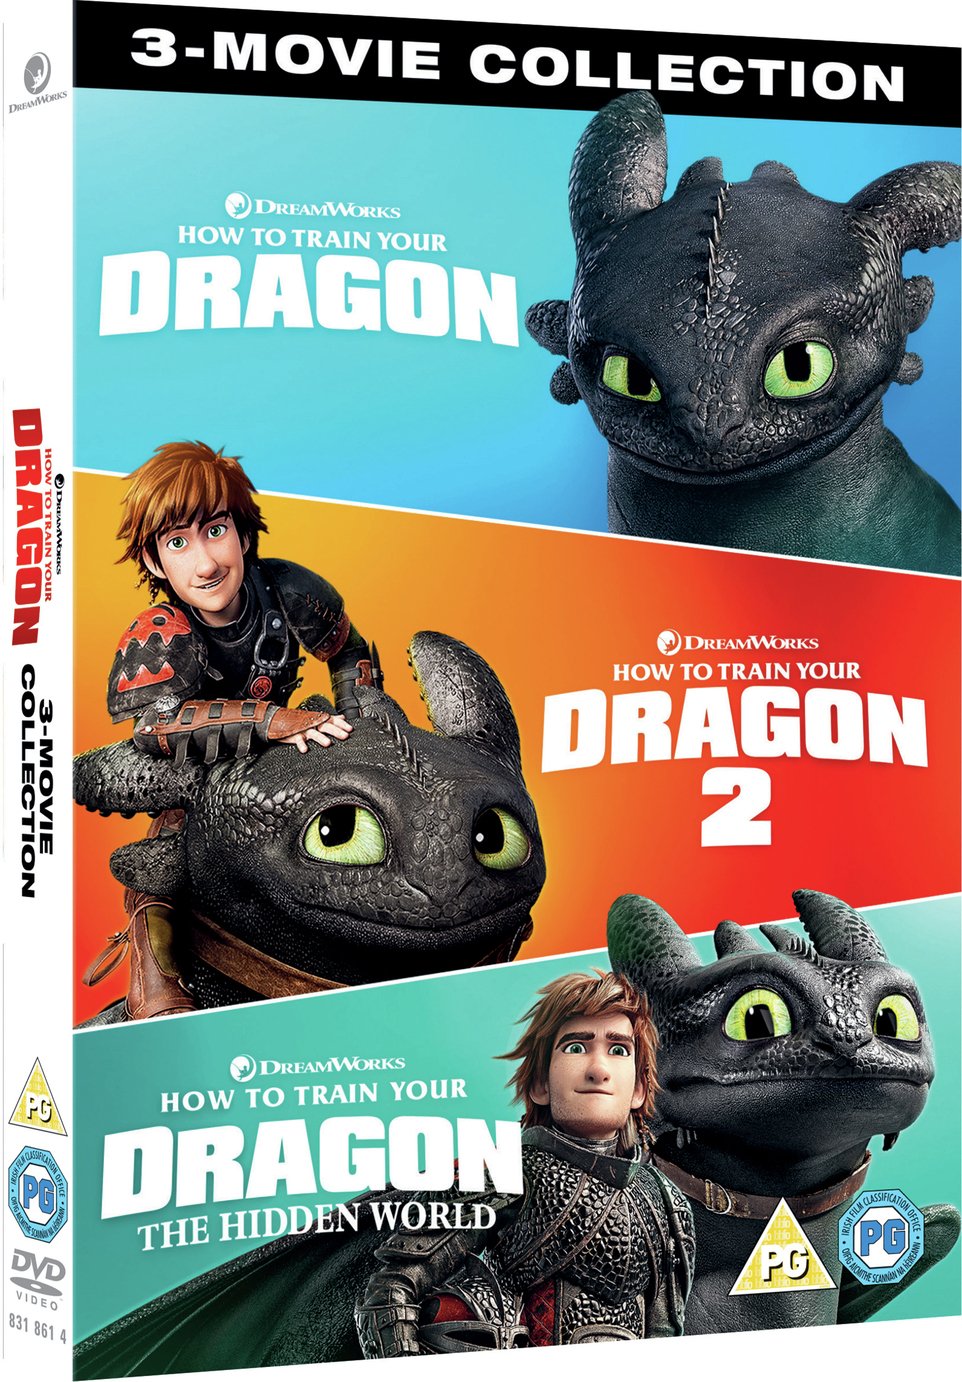 How to Train Your Dragon 3 Movie Collection DVD Box Set